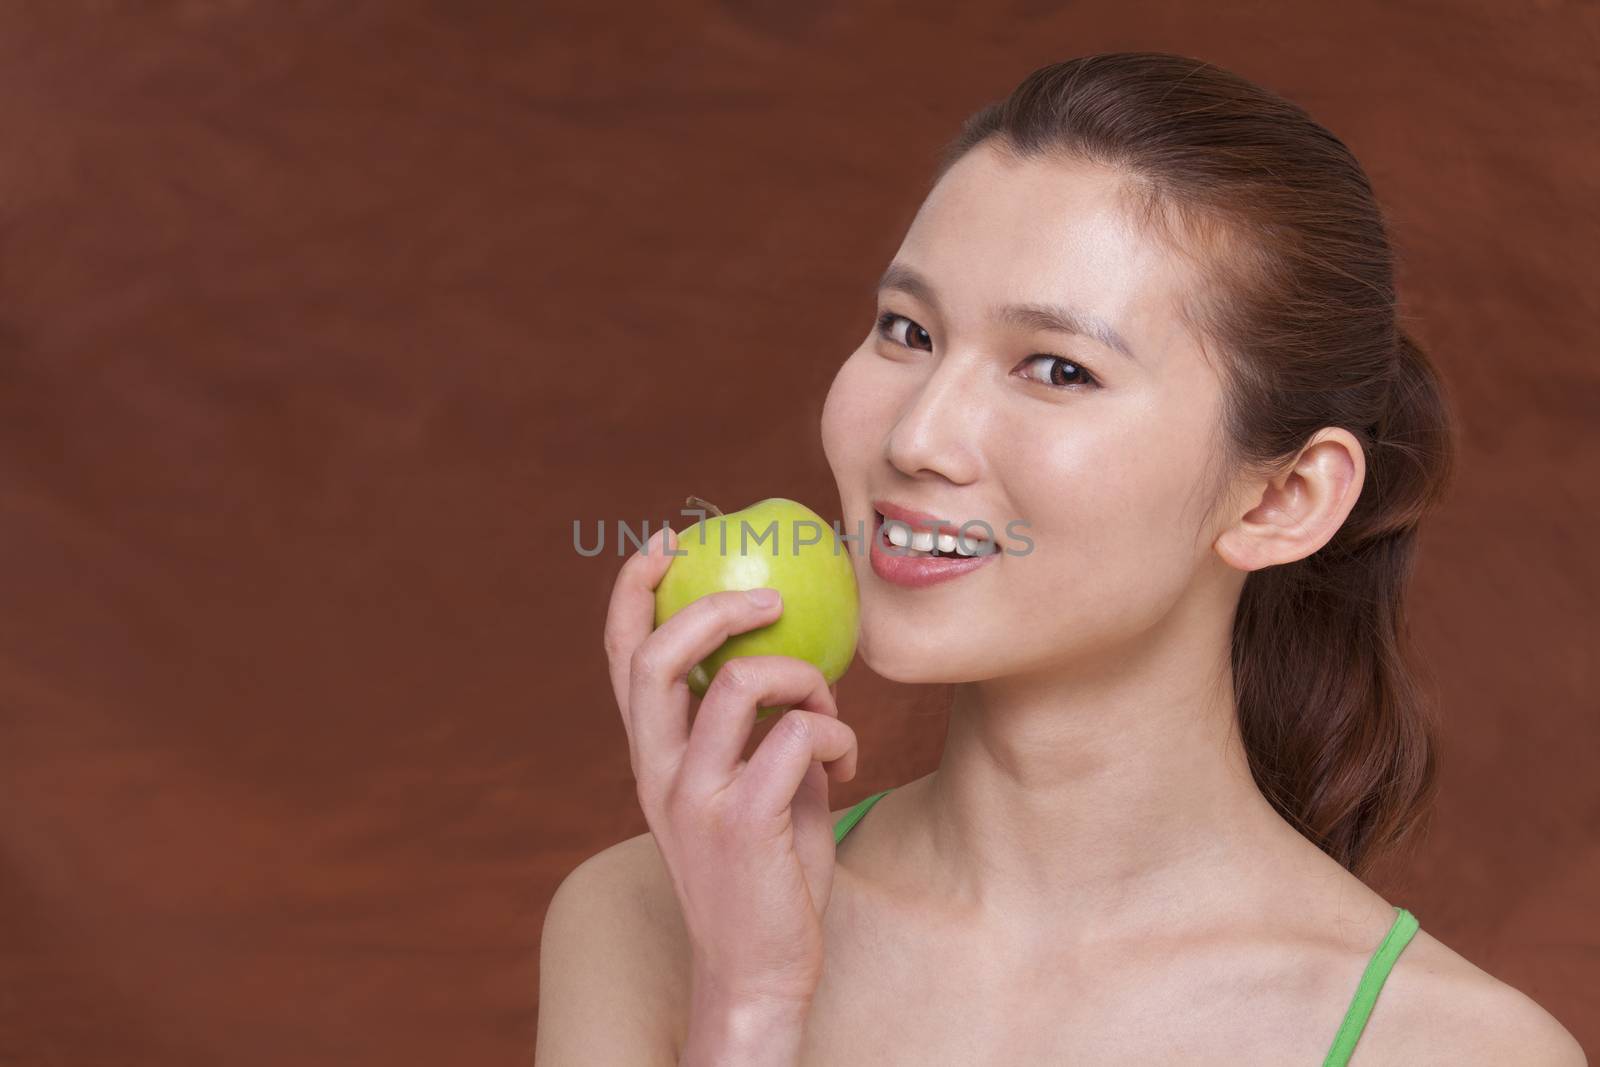 Young woman holding a apple and getting ready to take a bite, looking at camera, studio shot by XiXinXing